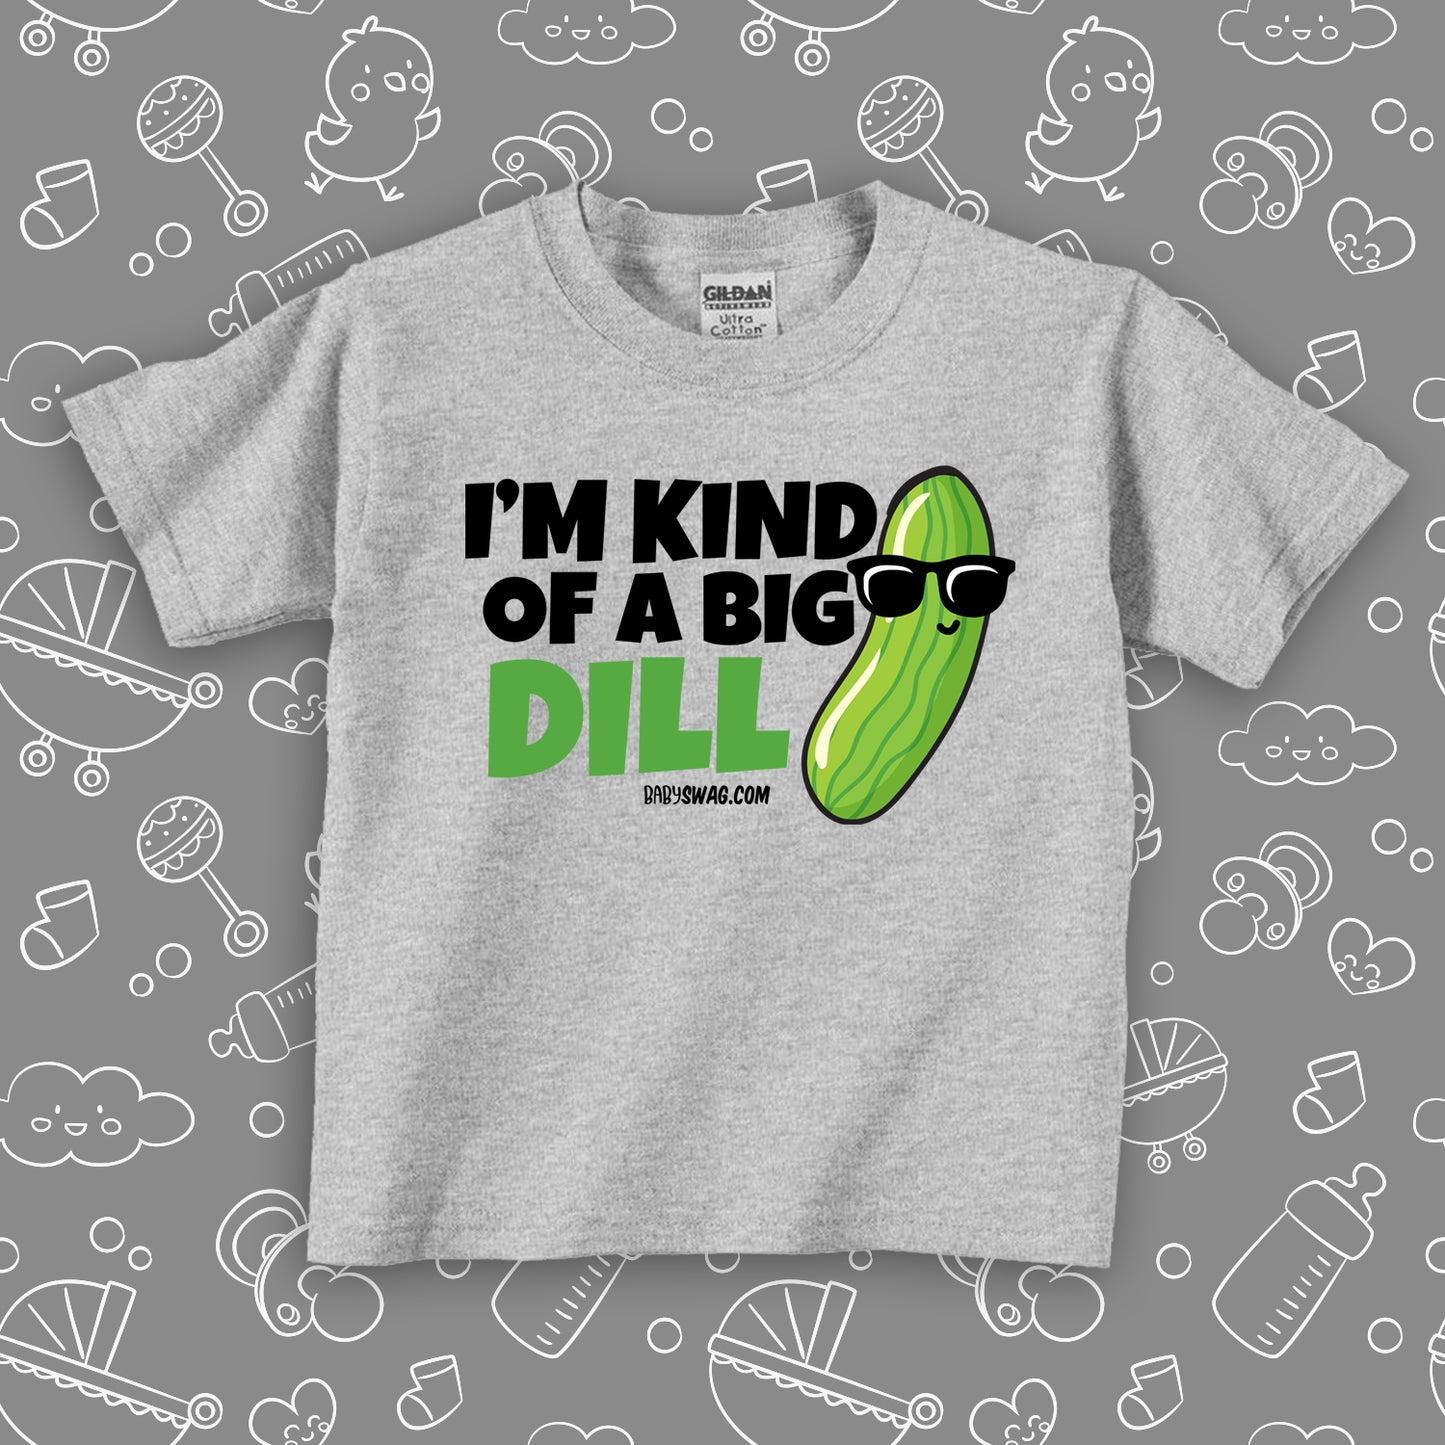 A funny toddler shirt saying "I'm Kind Of A Big Dill", with the image of a pickle wearing sunglasses, in grey. 